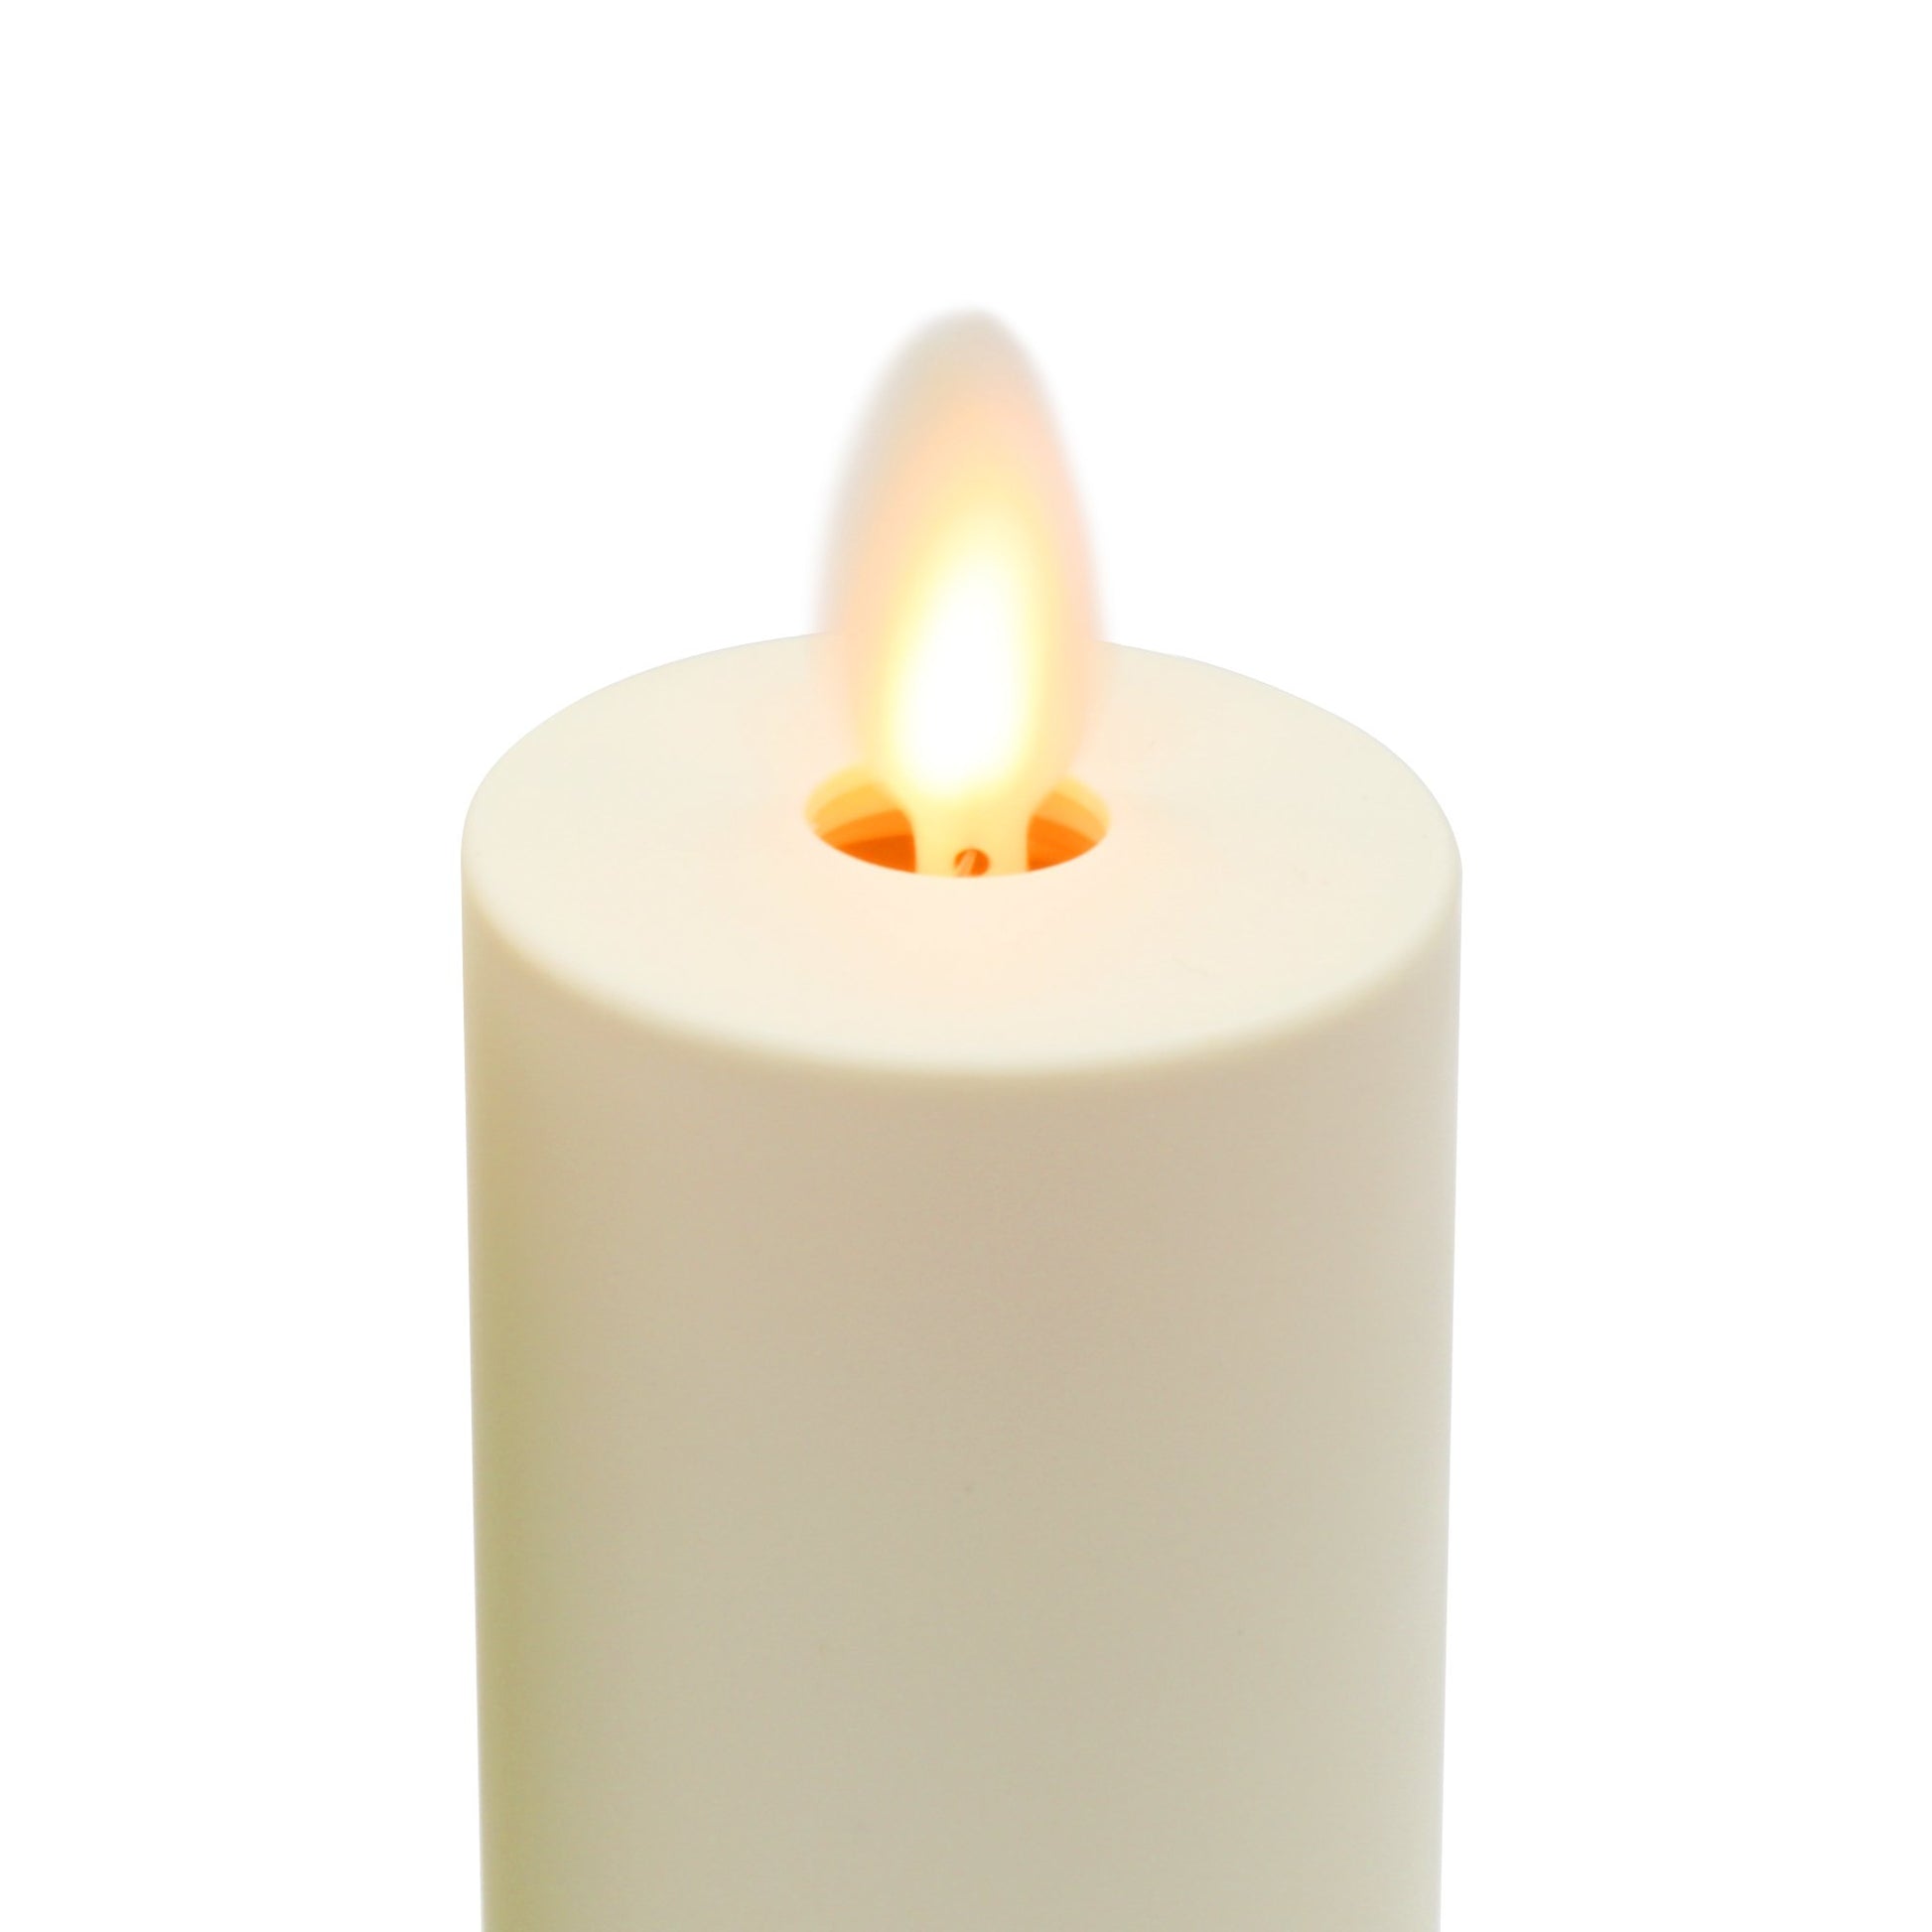 Luminara Real-Flame Effect Votive LED Candle, Flat Edge, Unscented, Ivory (2-Pack) - Flicker and Glow